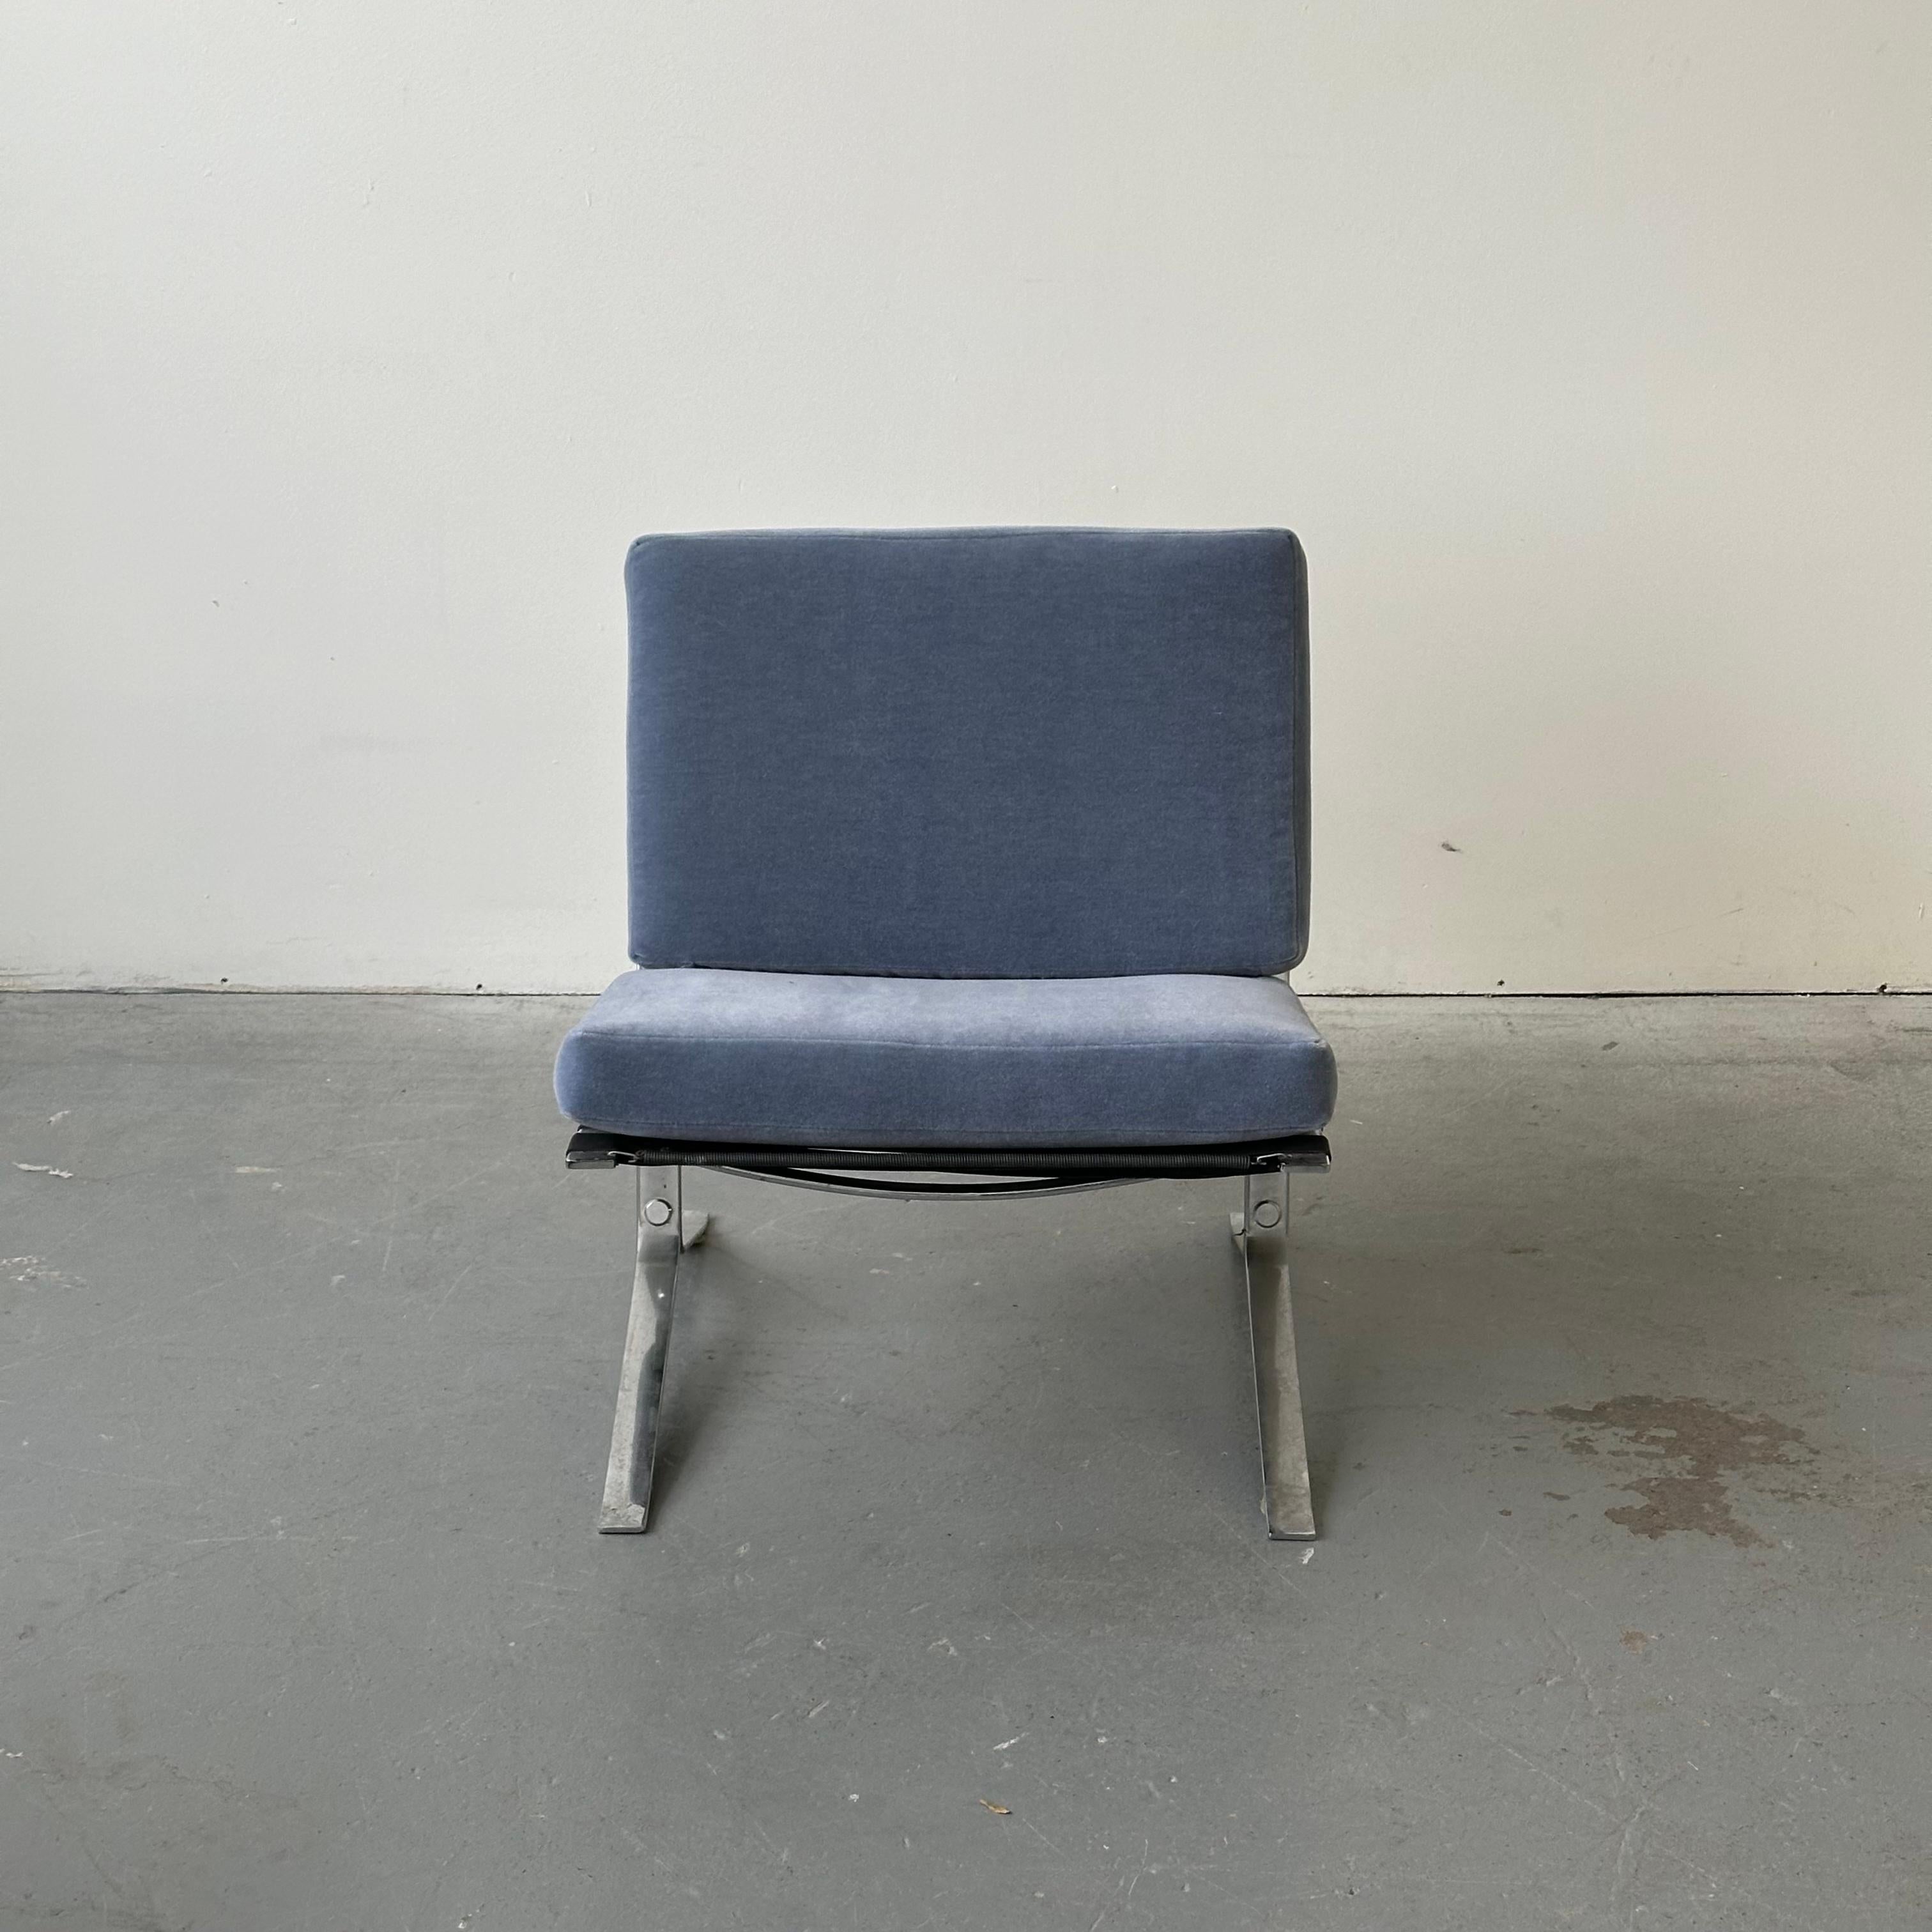 c. 1960s, France - produced by Airborne. Lounge chair by French designer Olivier Mourgue was dubbed as 